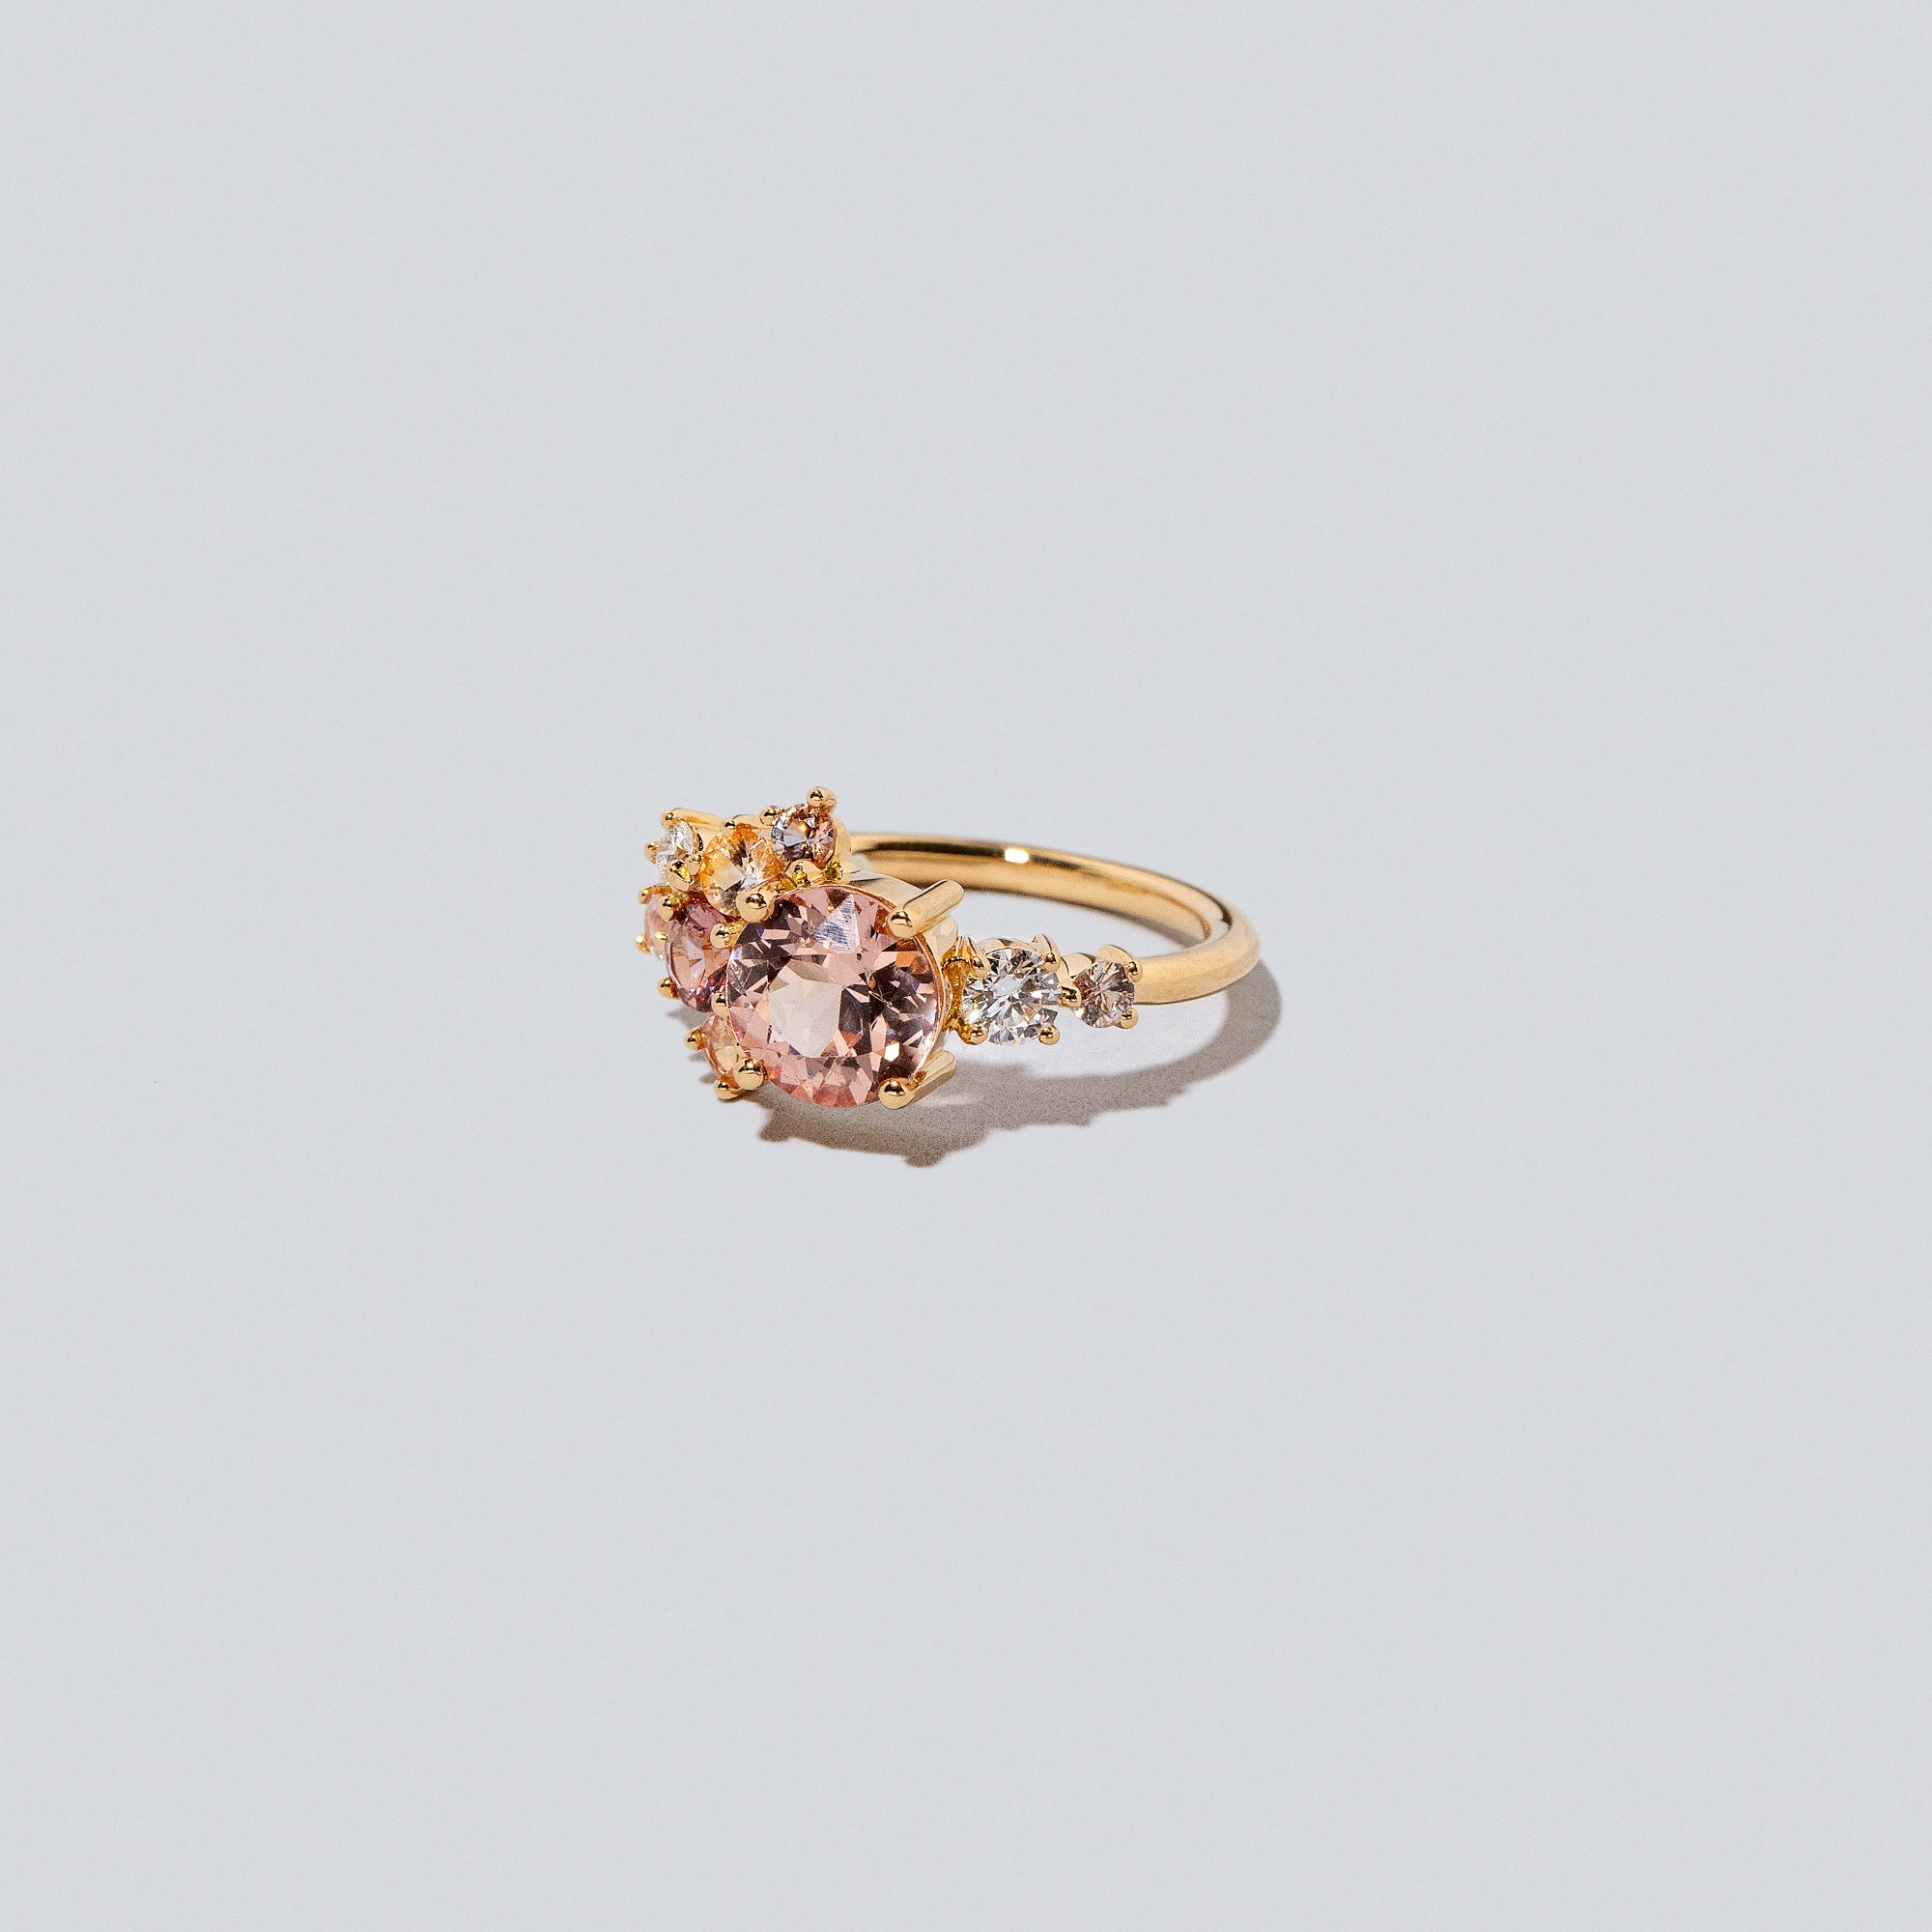 product_details::Vega Ring on light colored background.